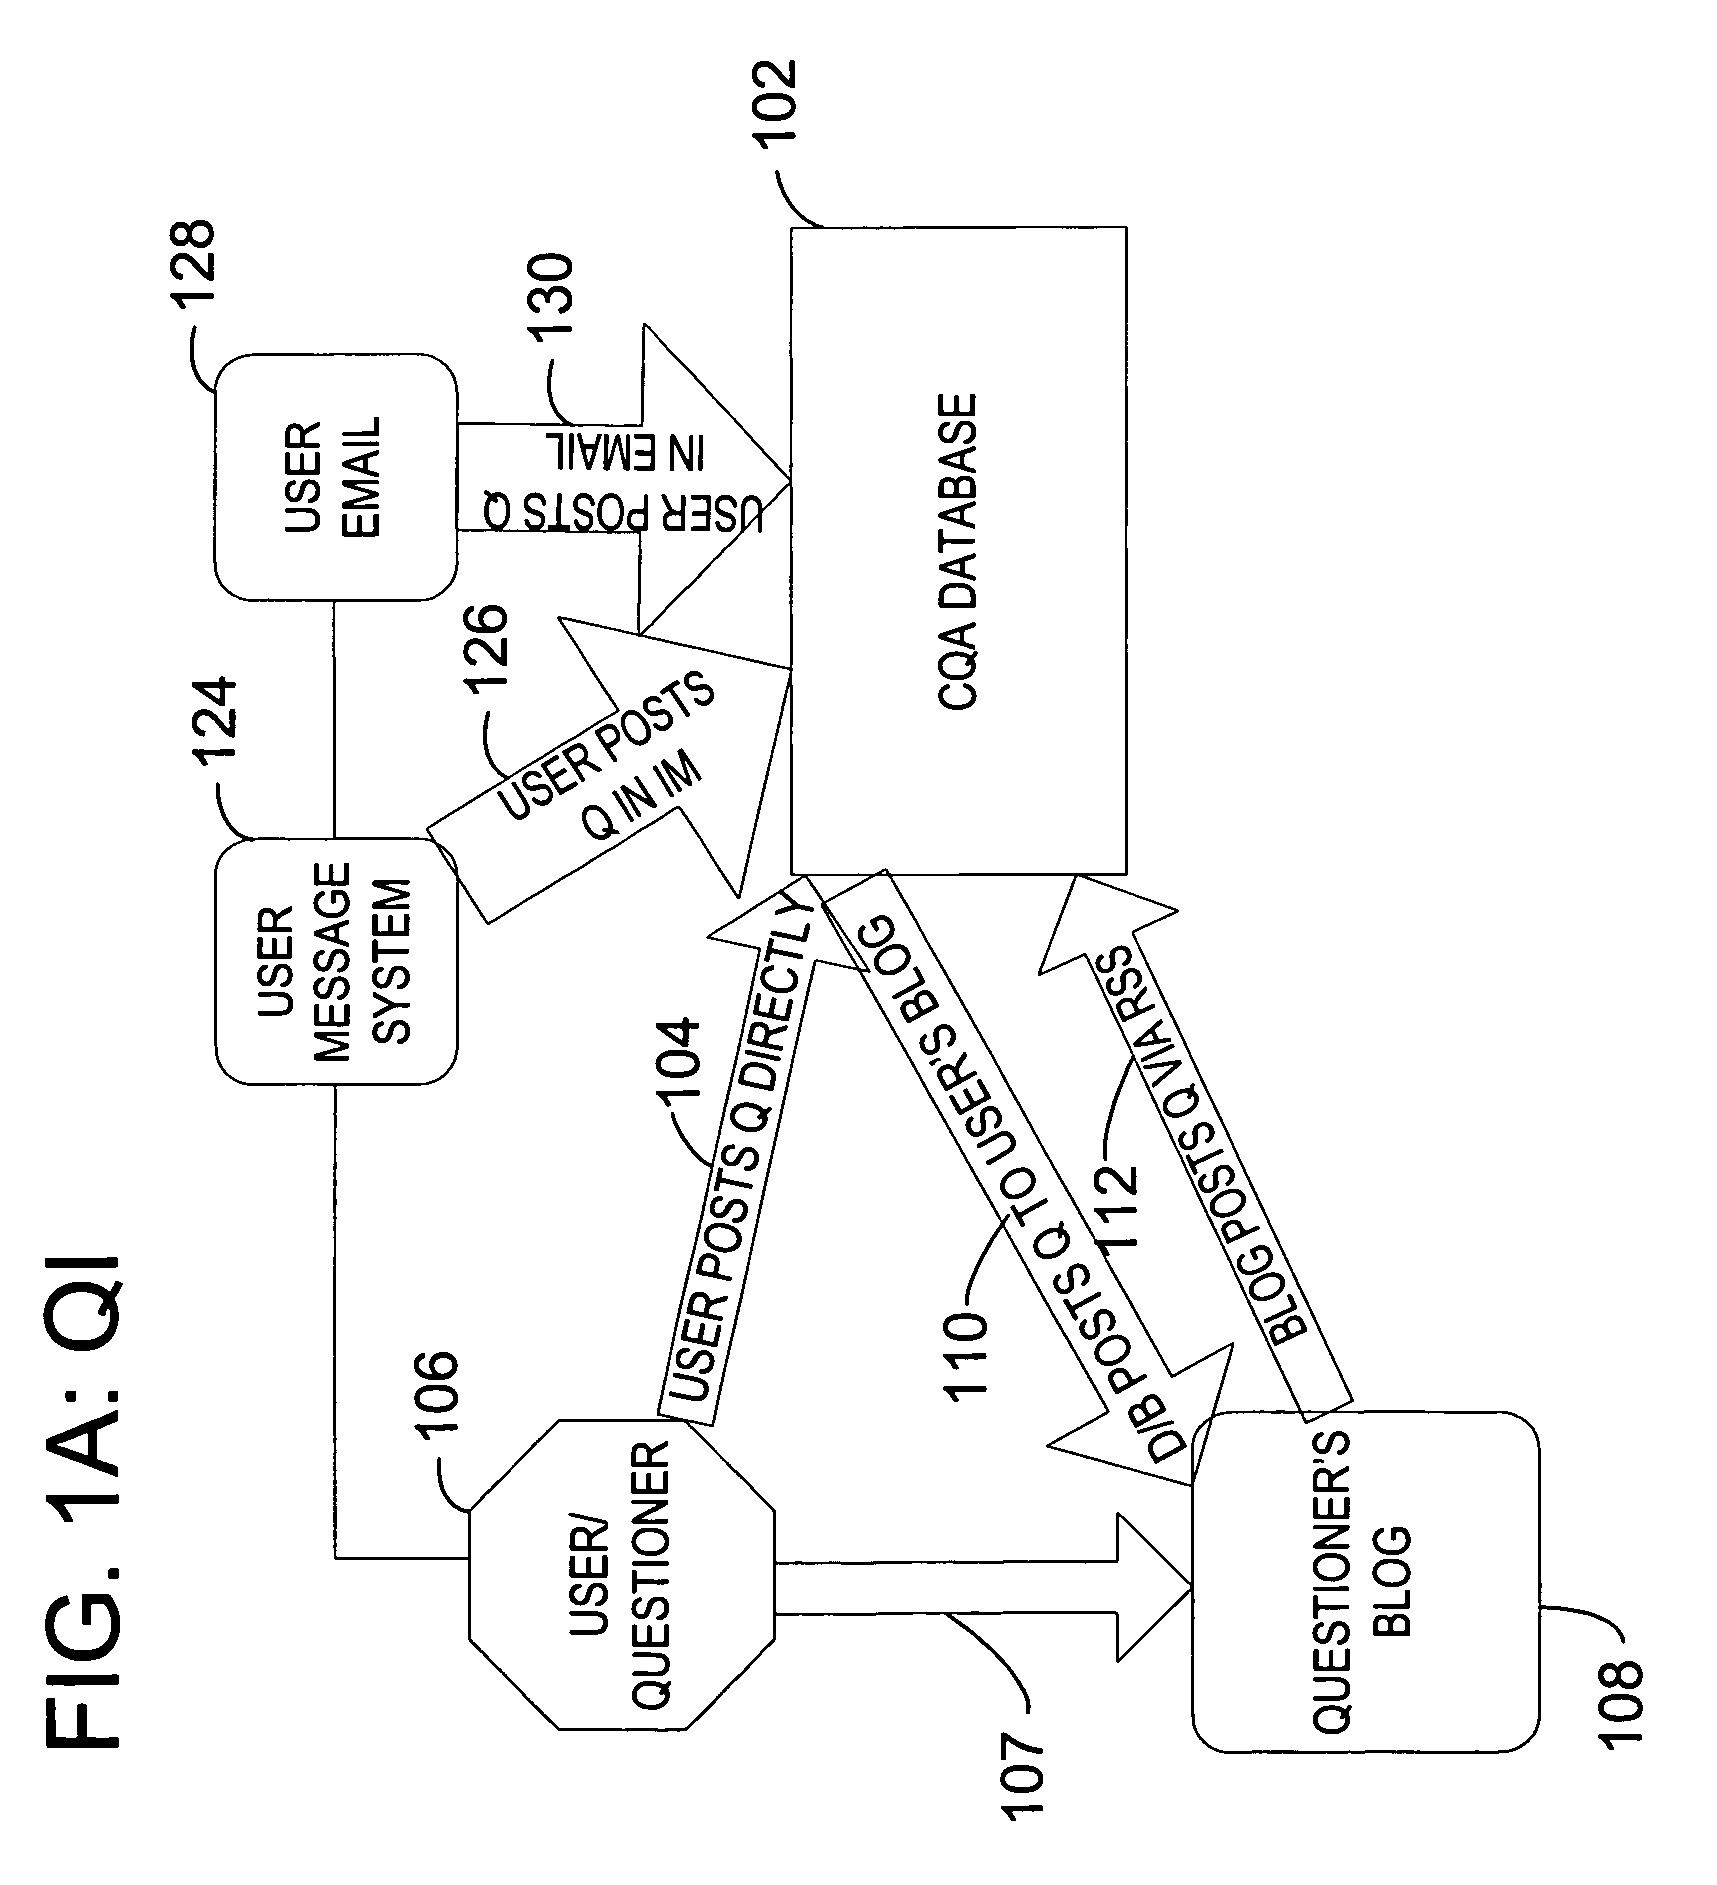 System and method for collecting question and answer pairs